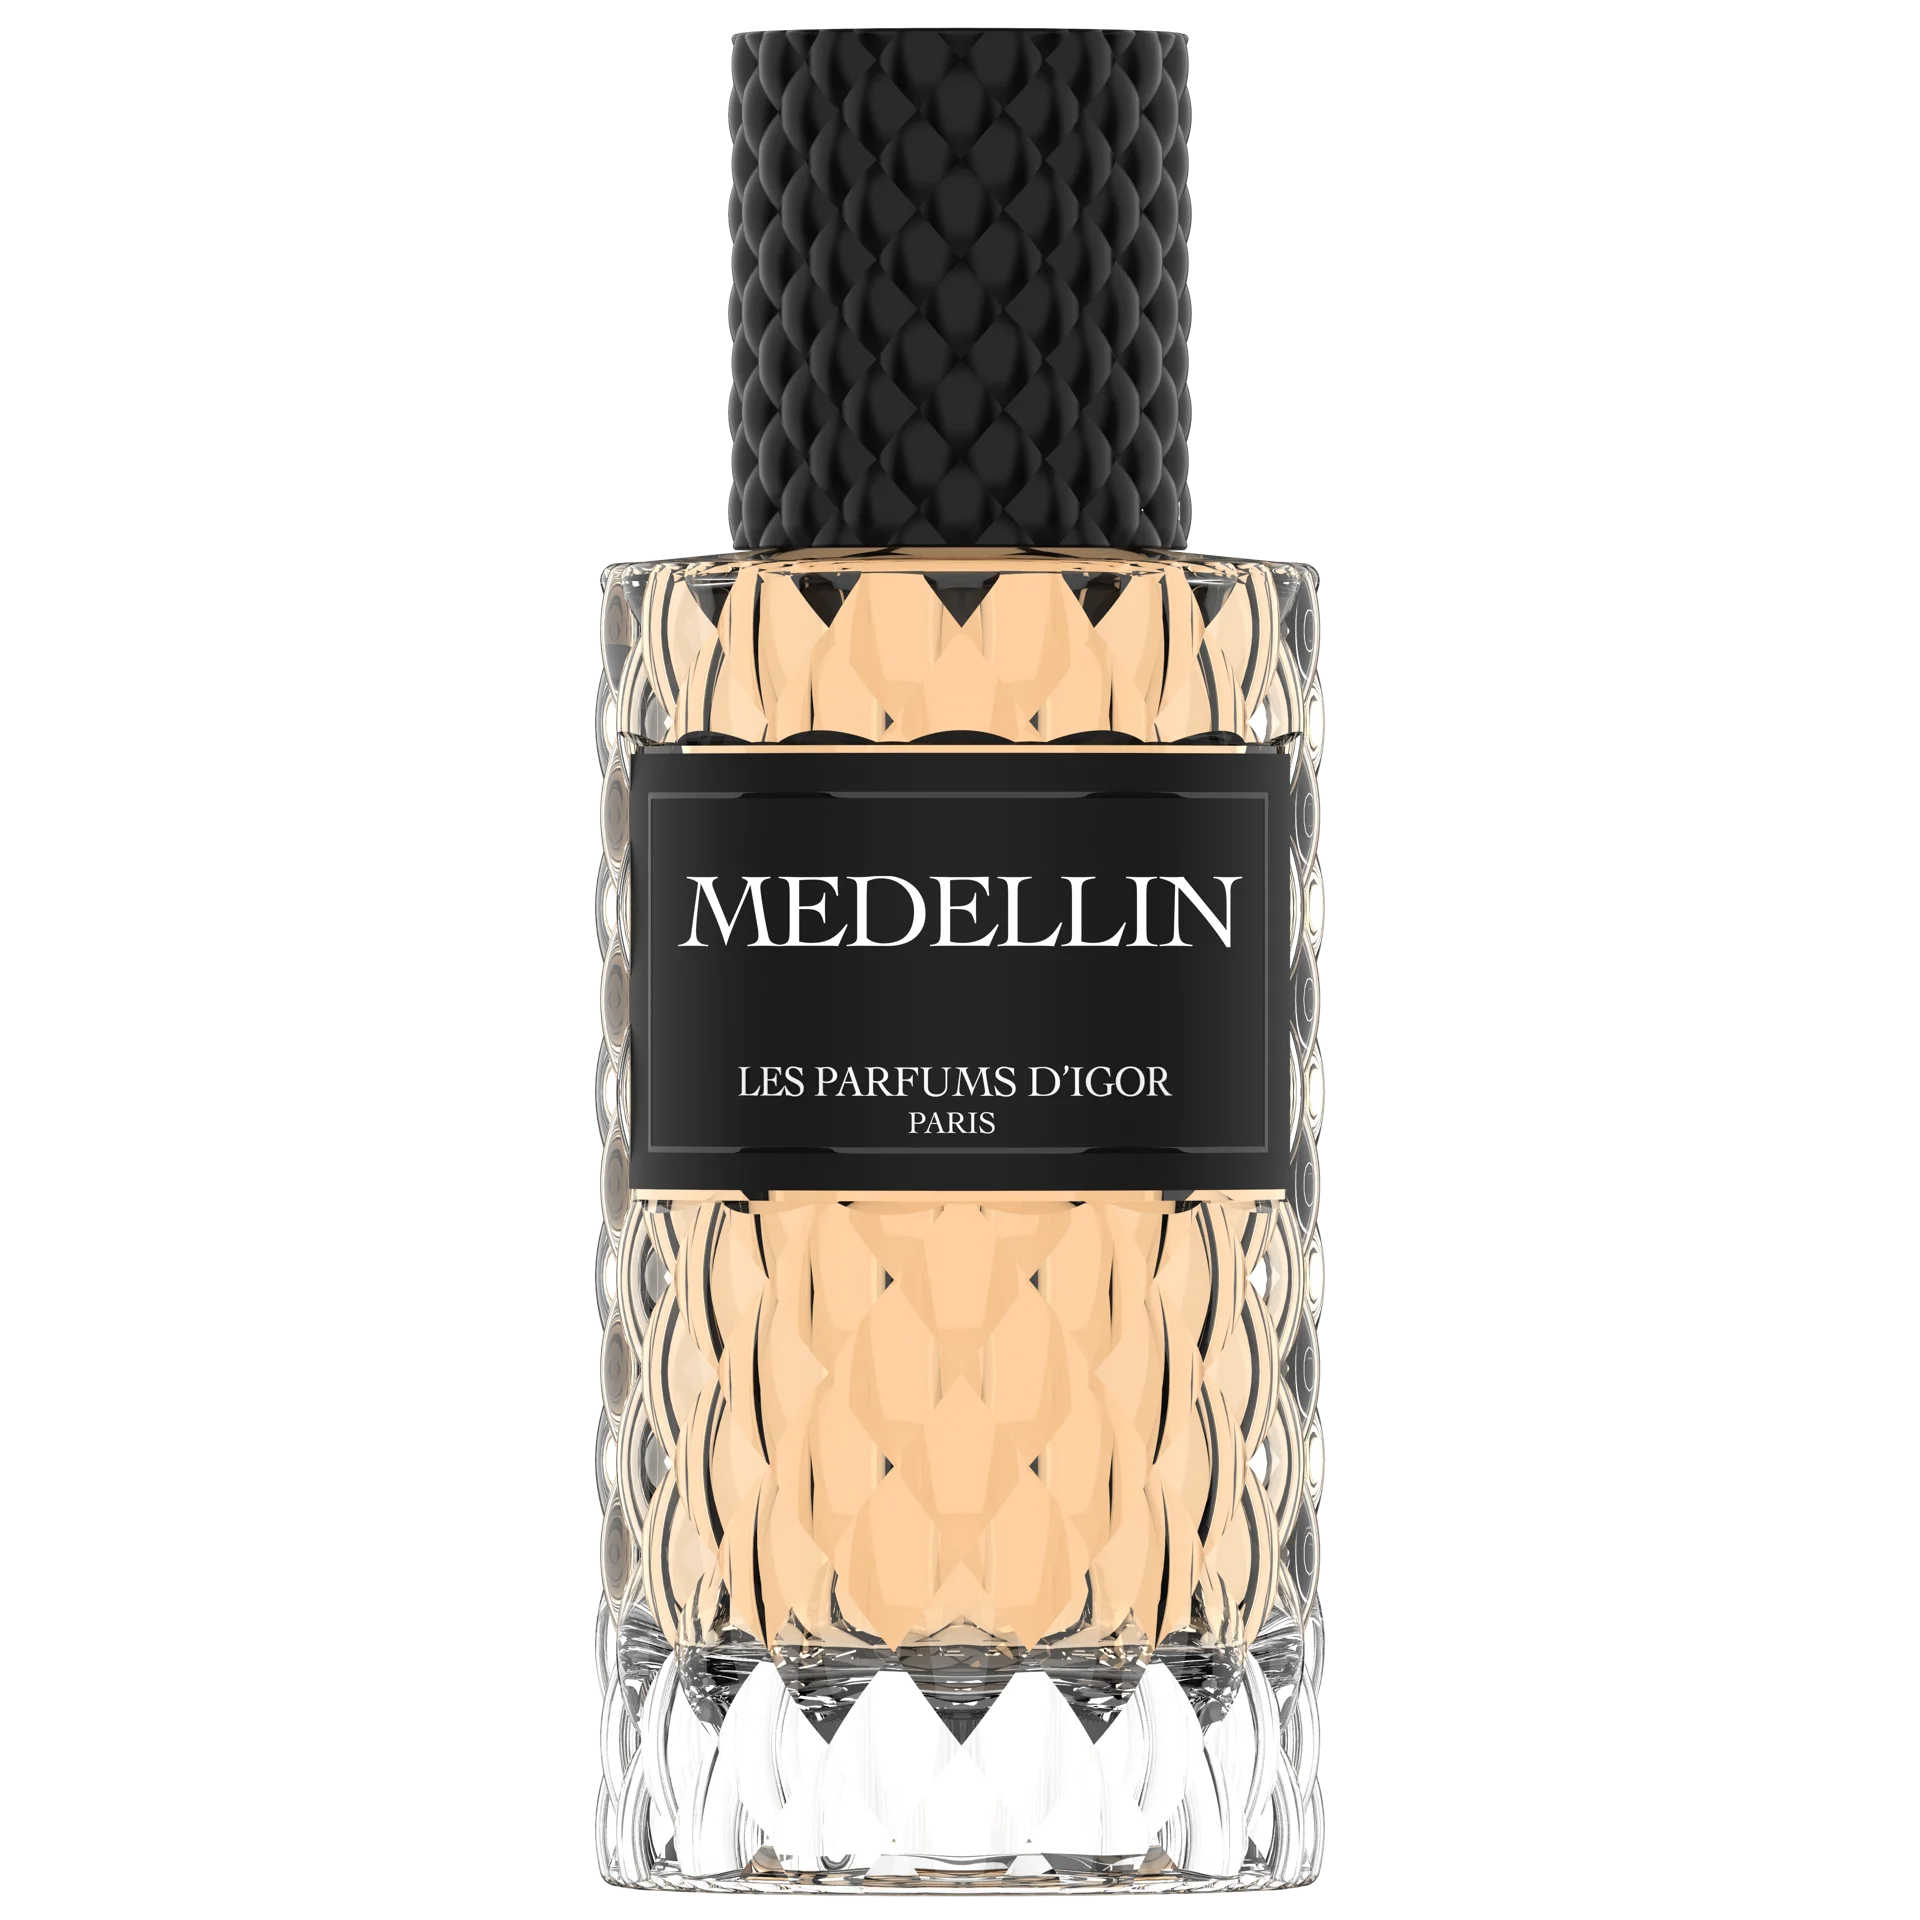 Medellin - Les parfums d'Igor - Tuscan leather